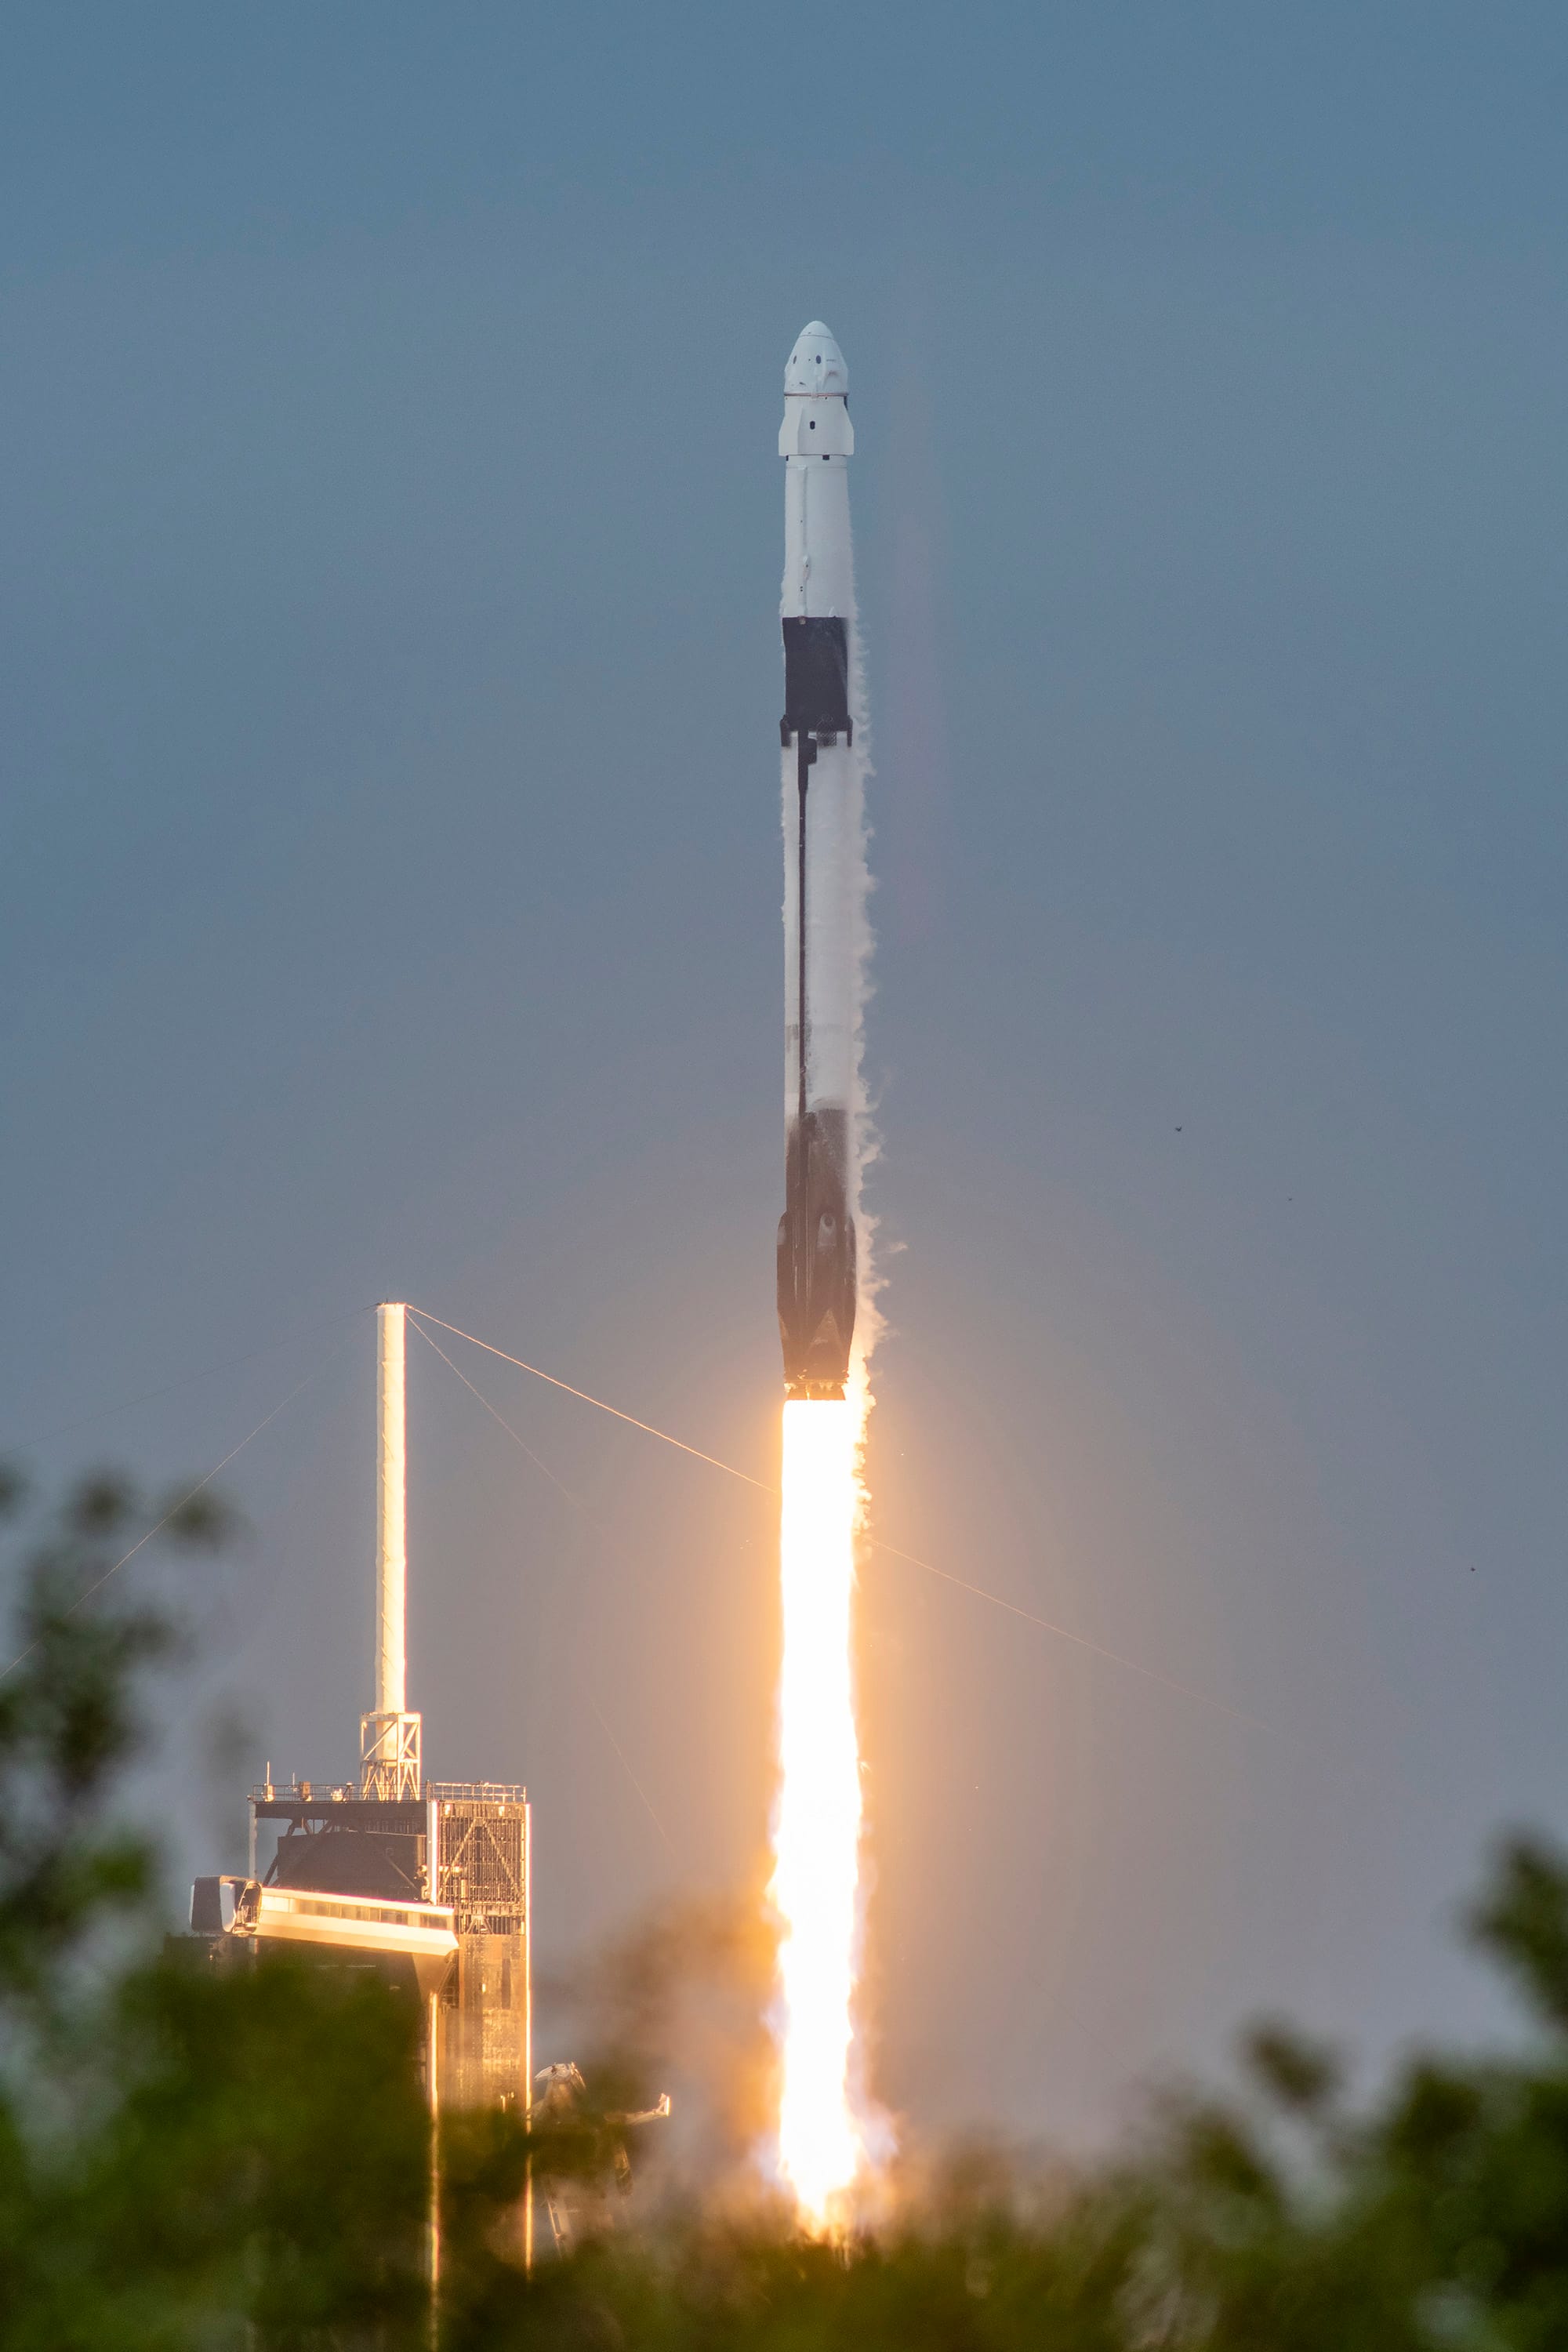 Falcon 9 lifting off from LC-39A in Cape Canaveral for the Axiom-3 mission. ©SpaceX